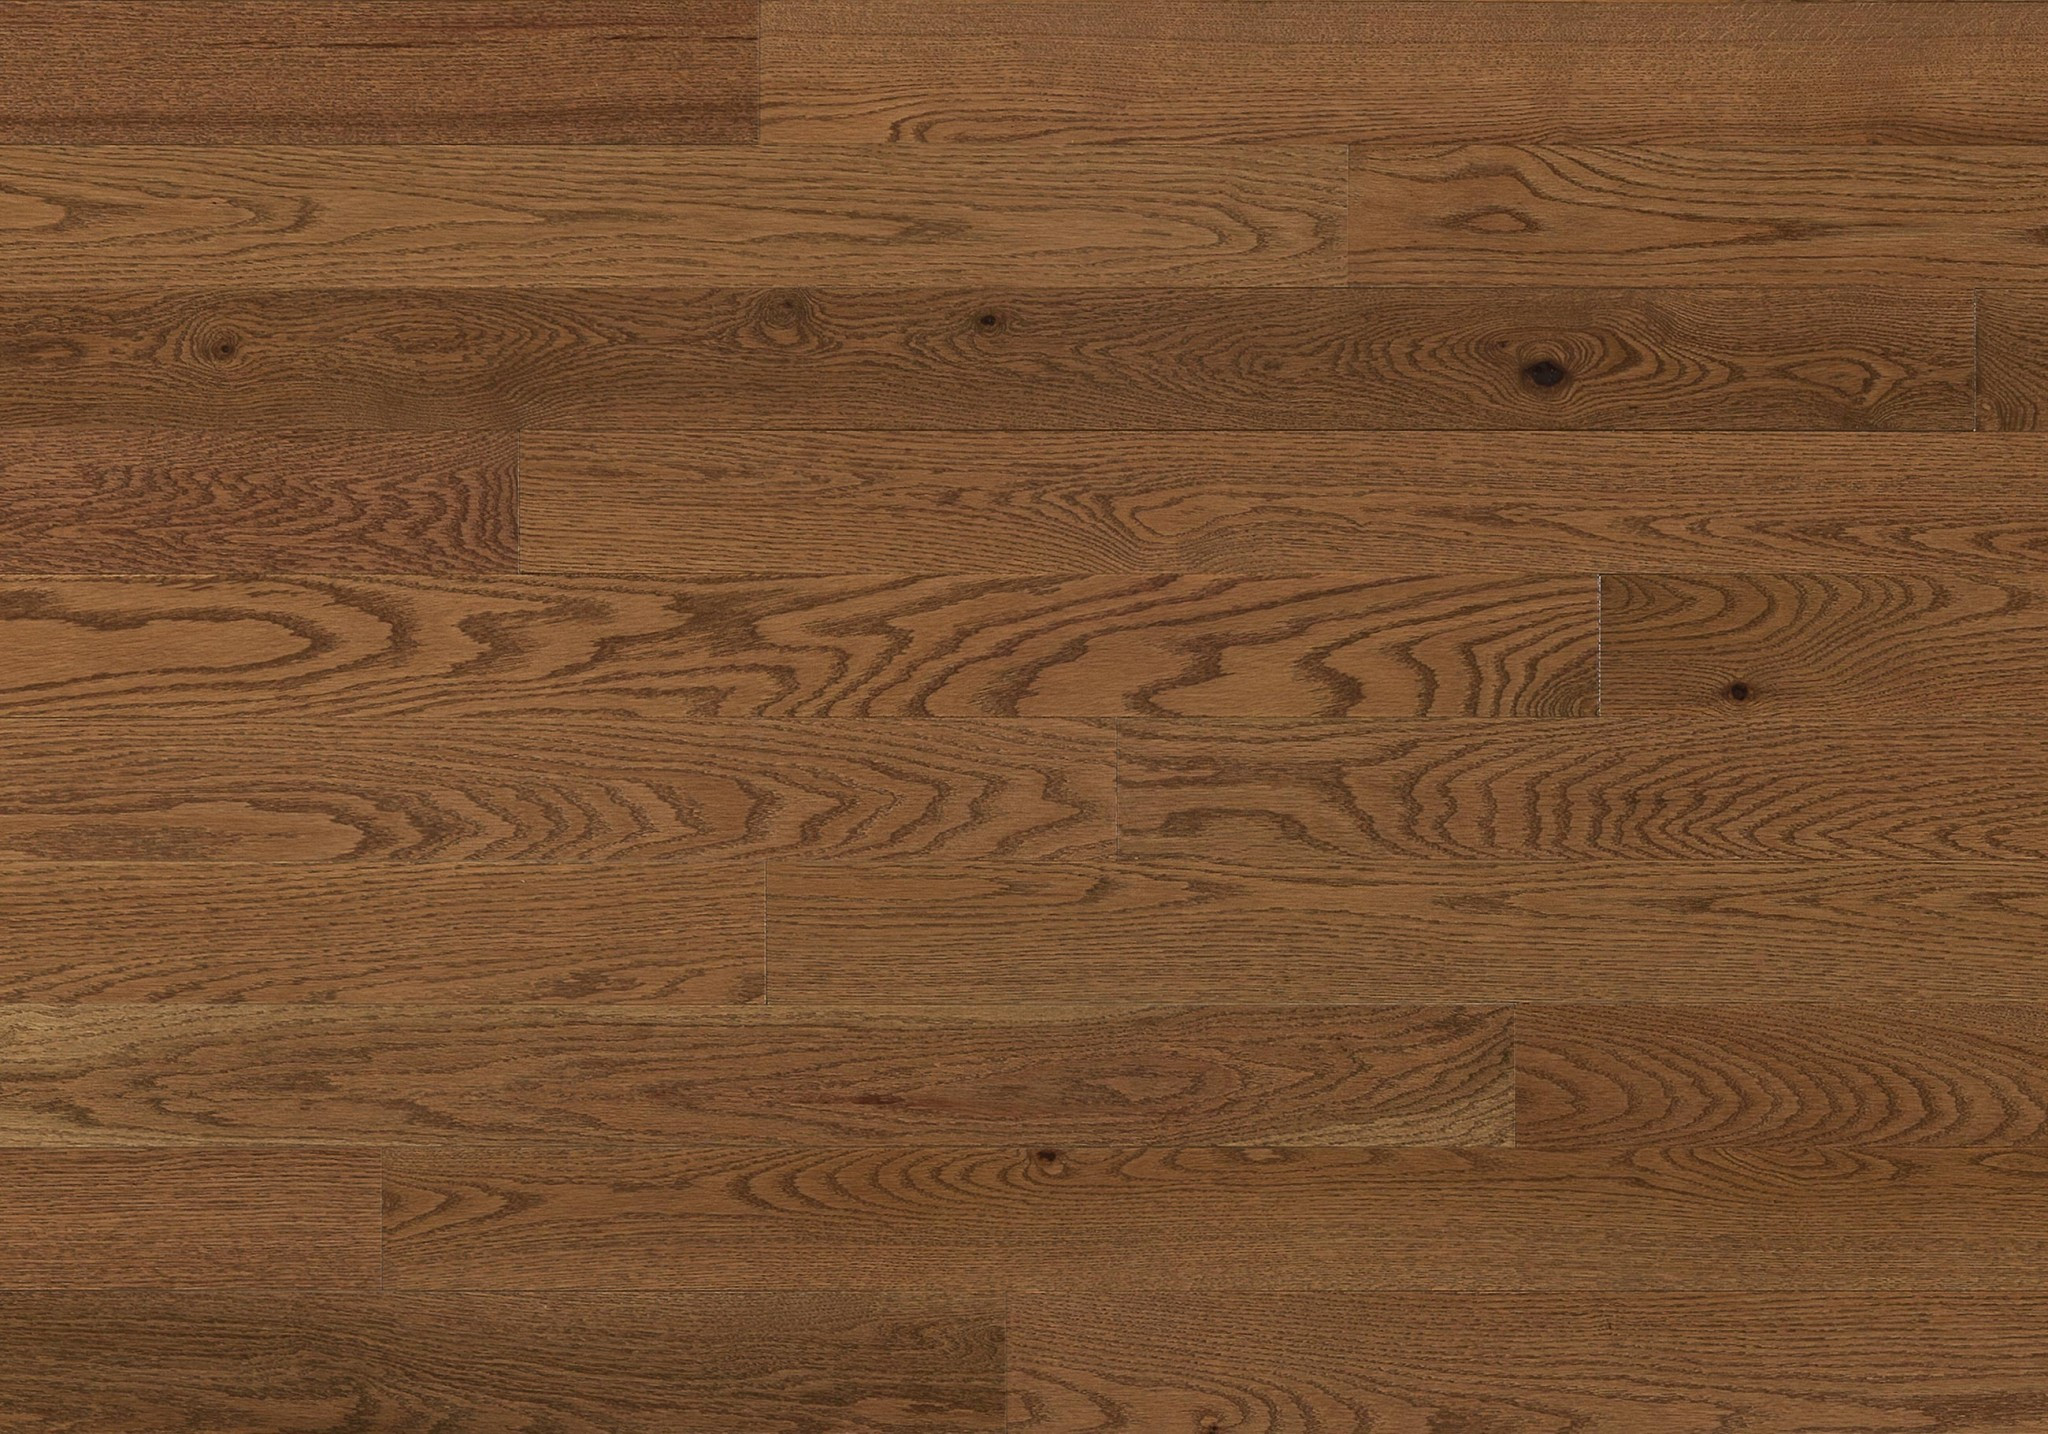 11 Awesome Lauzon Hardwood Flooring Prices 2024 free download lauzon hardwood flooring prices of red oak natural hardwood flooring preverco of red oak flooring inside caf au lait essential red oak essential lauzon for red oak flooring hardwood